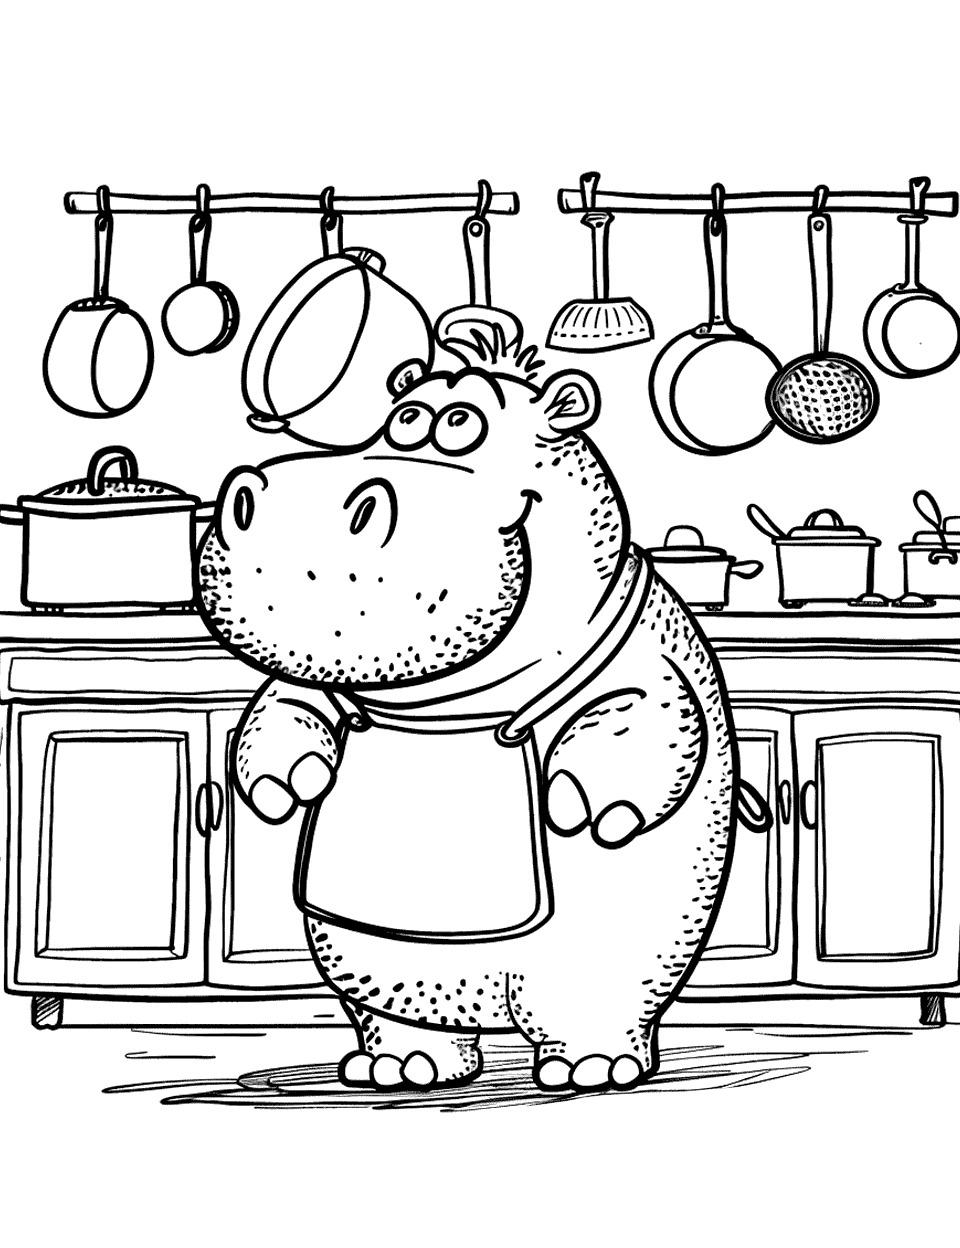 Hippo Chef Coloring Page - A hippo cook fully dressed in the kitchen, surrounded by pots and pans.